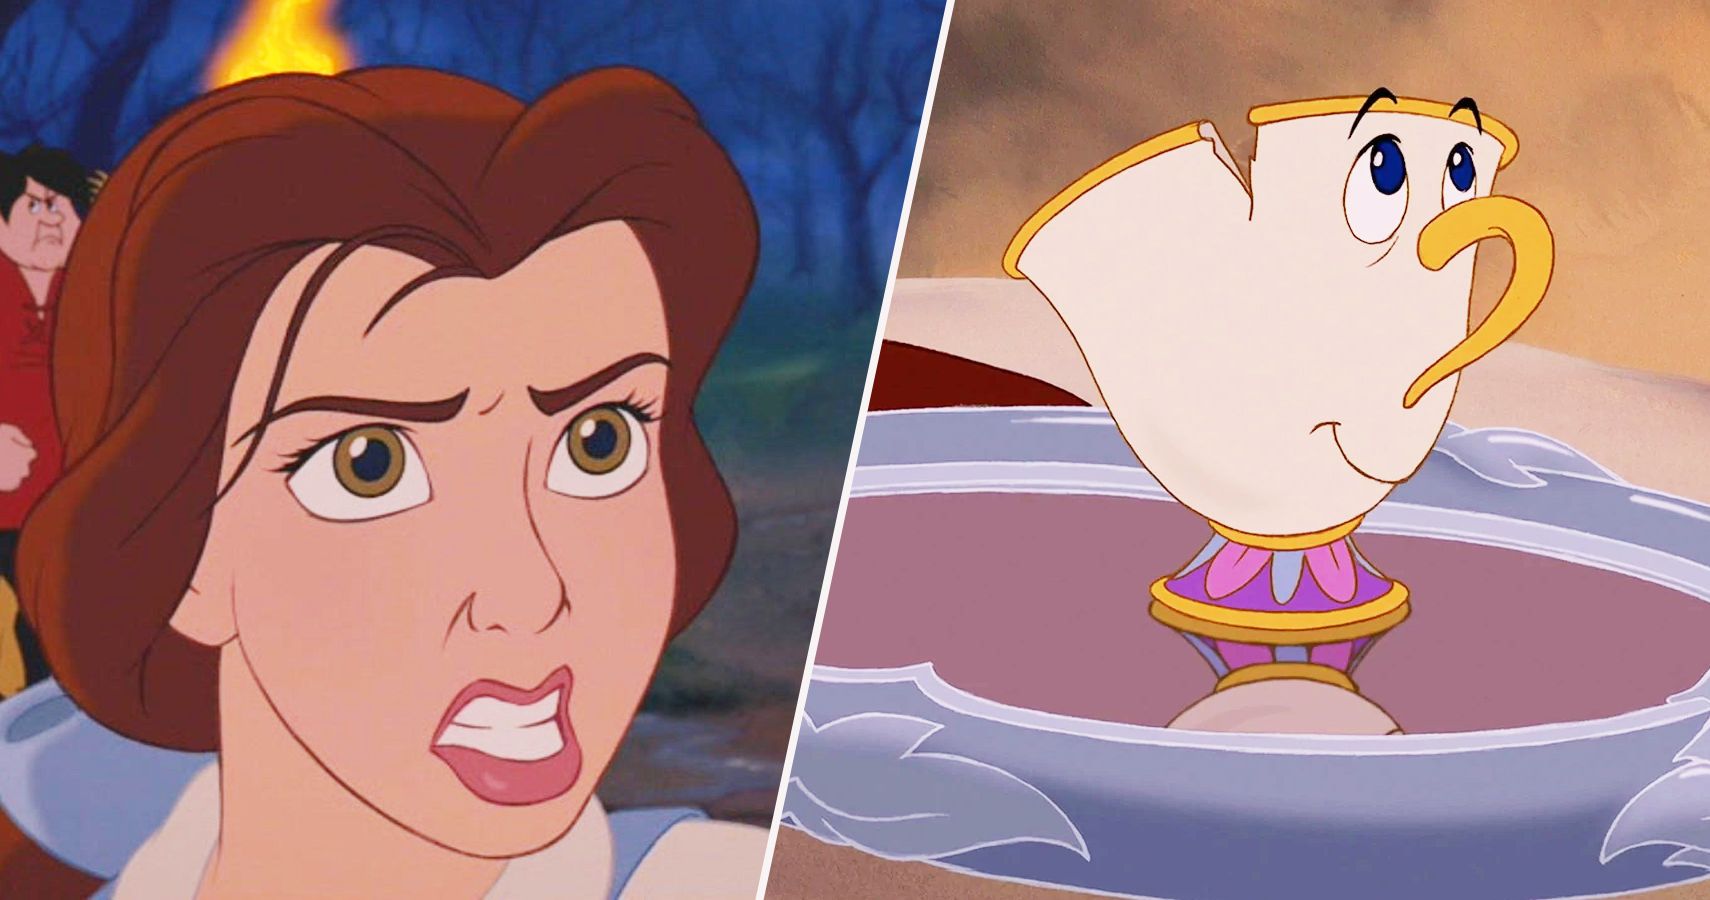 Disney: 25 Things Wrong With Beauty And The Beast We All Choose To Ignore